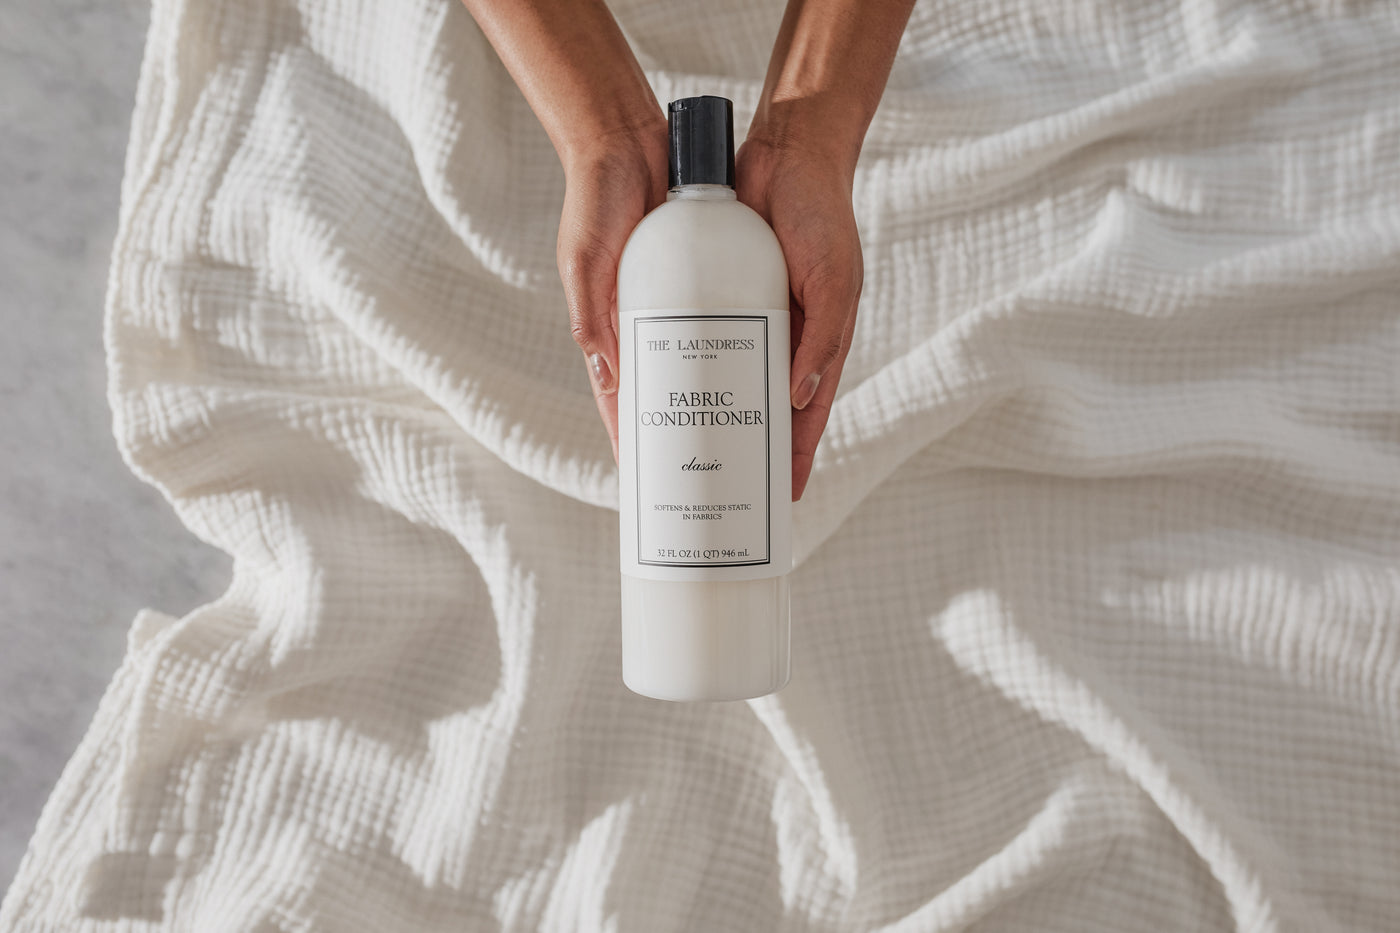 The Laundress Fabric Conditioner for softening and reducing static in fabrics held over white fabric.